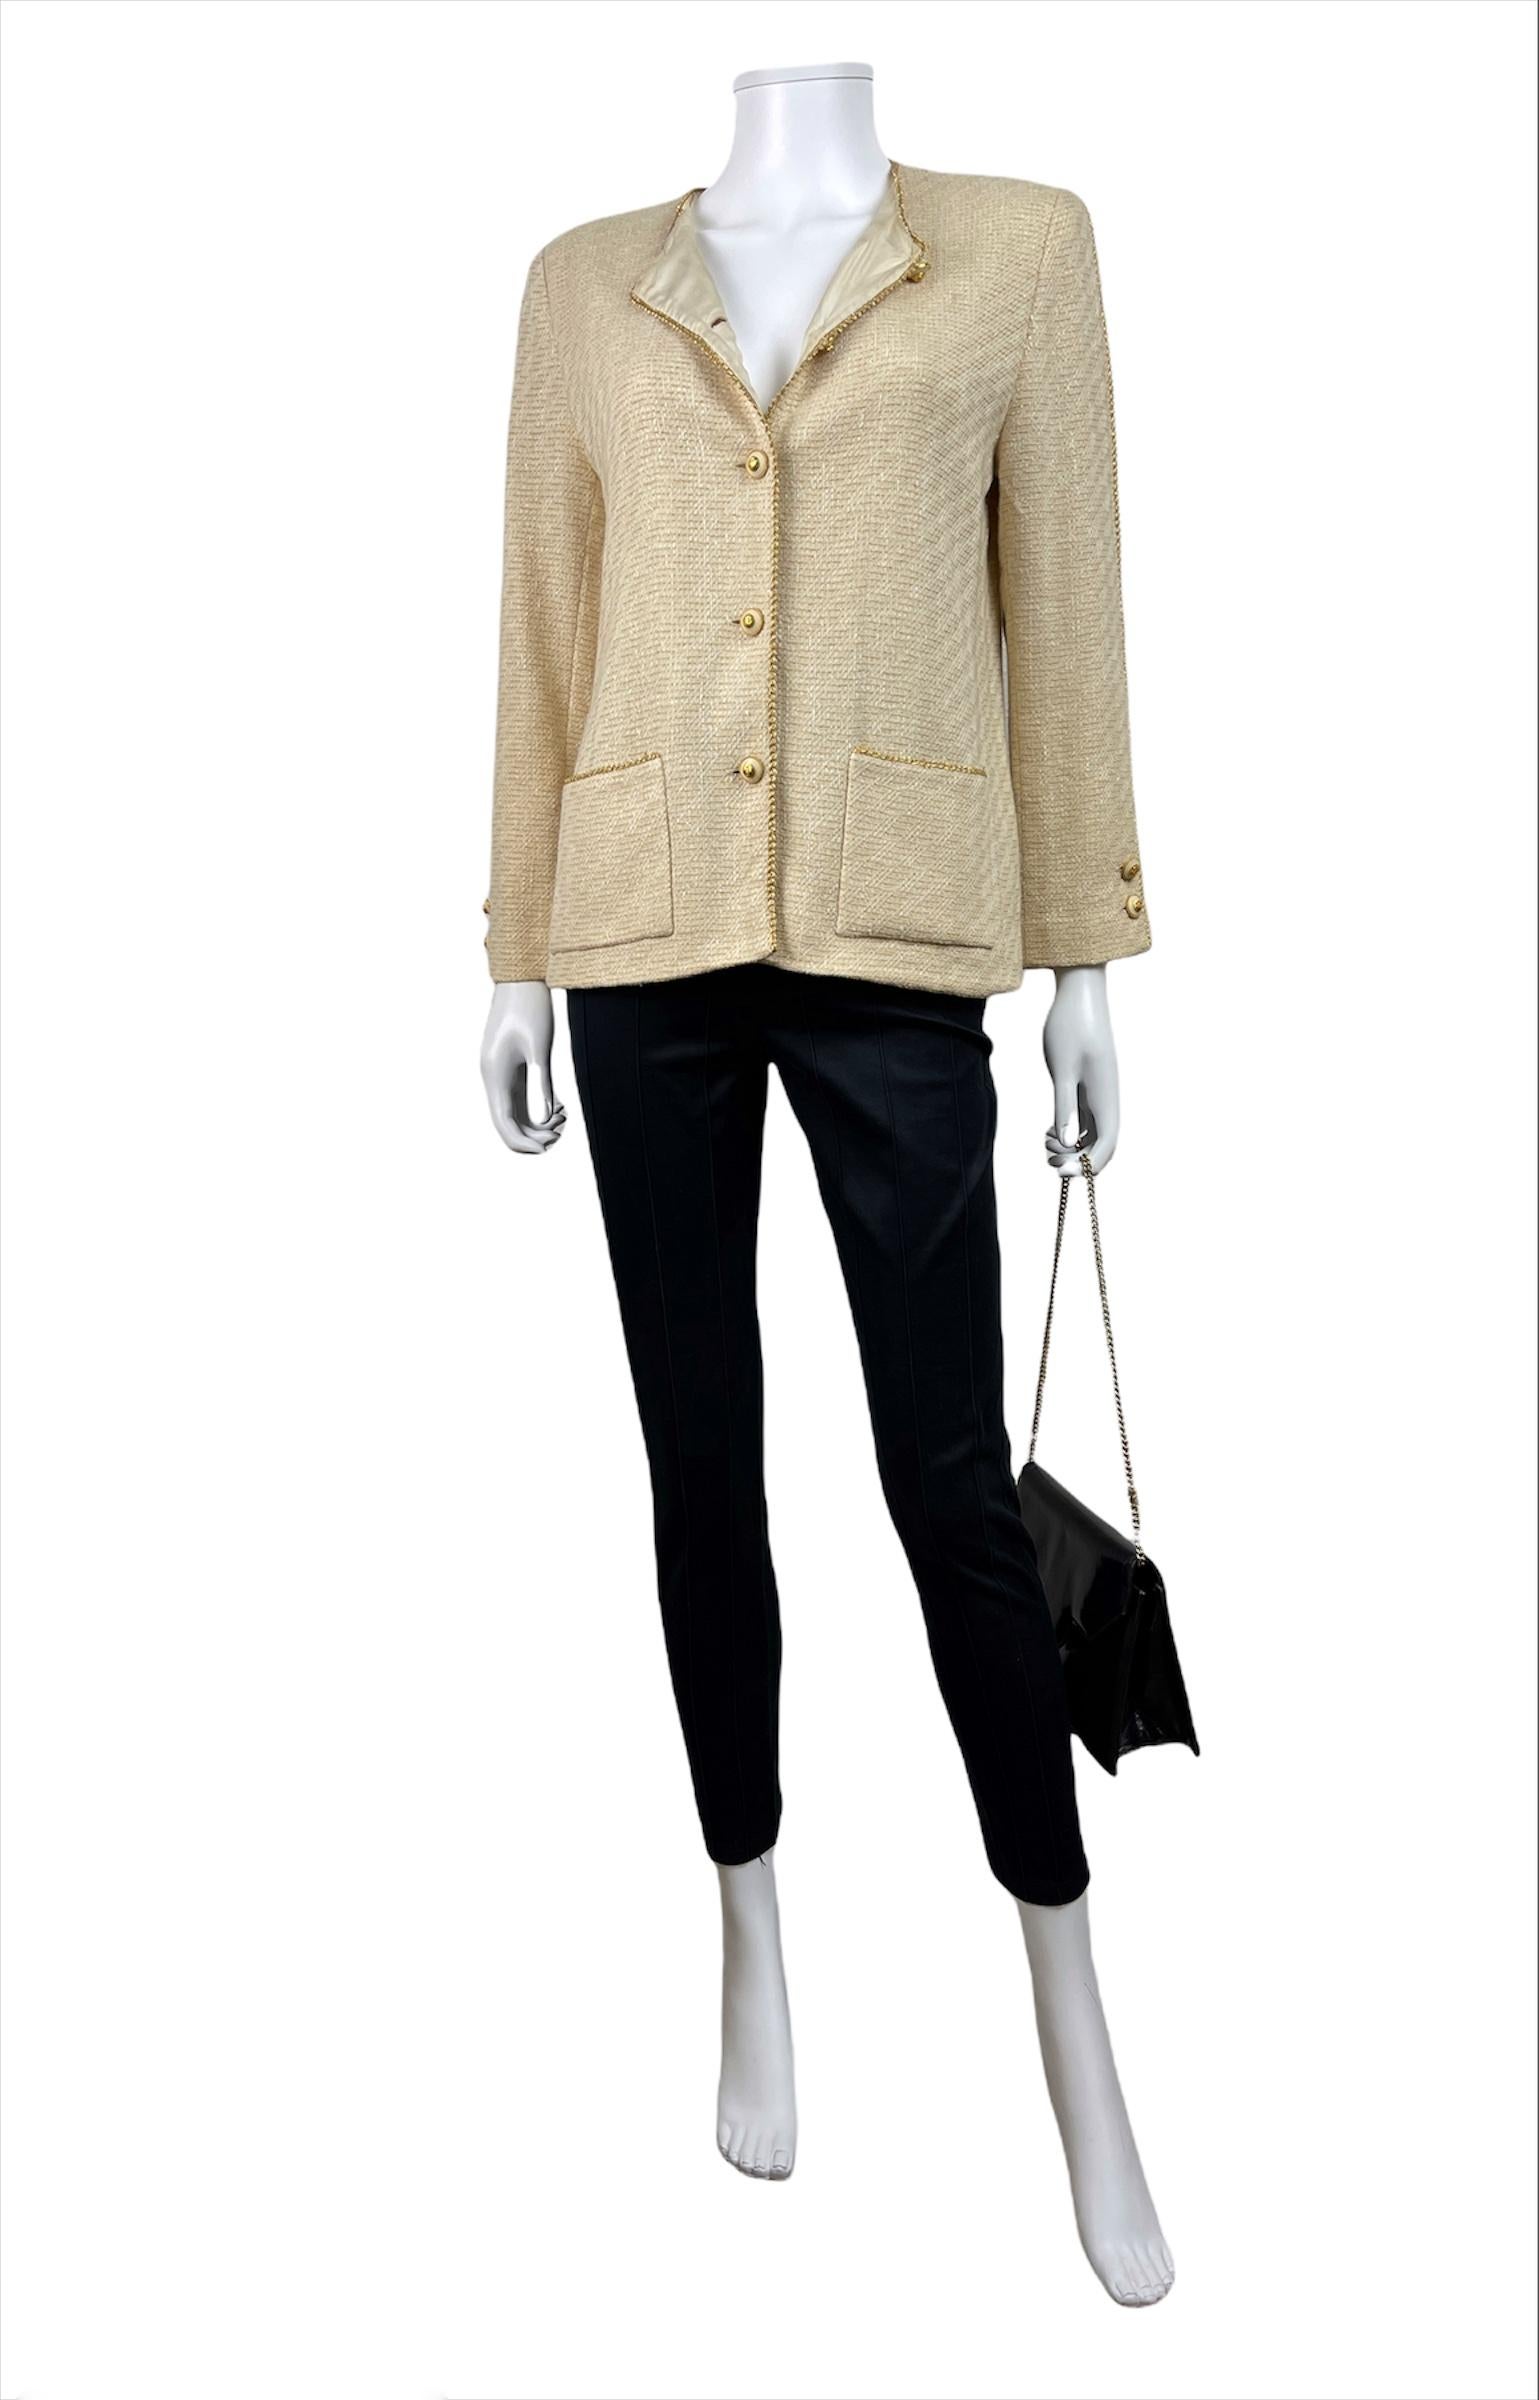 CHANEL, Made in France.
Chanel ivory mix wool set composed of a jacket and a mid-length skirt. 
The jacket has a round neck, shoulder pads and two front patch pockets. It has the famous chain inside that gives a beautiful fallen to the fabric. 
All